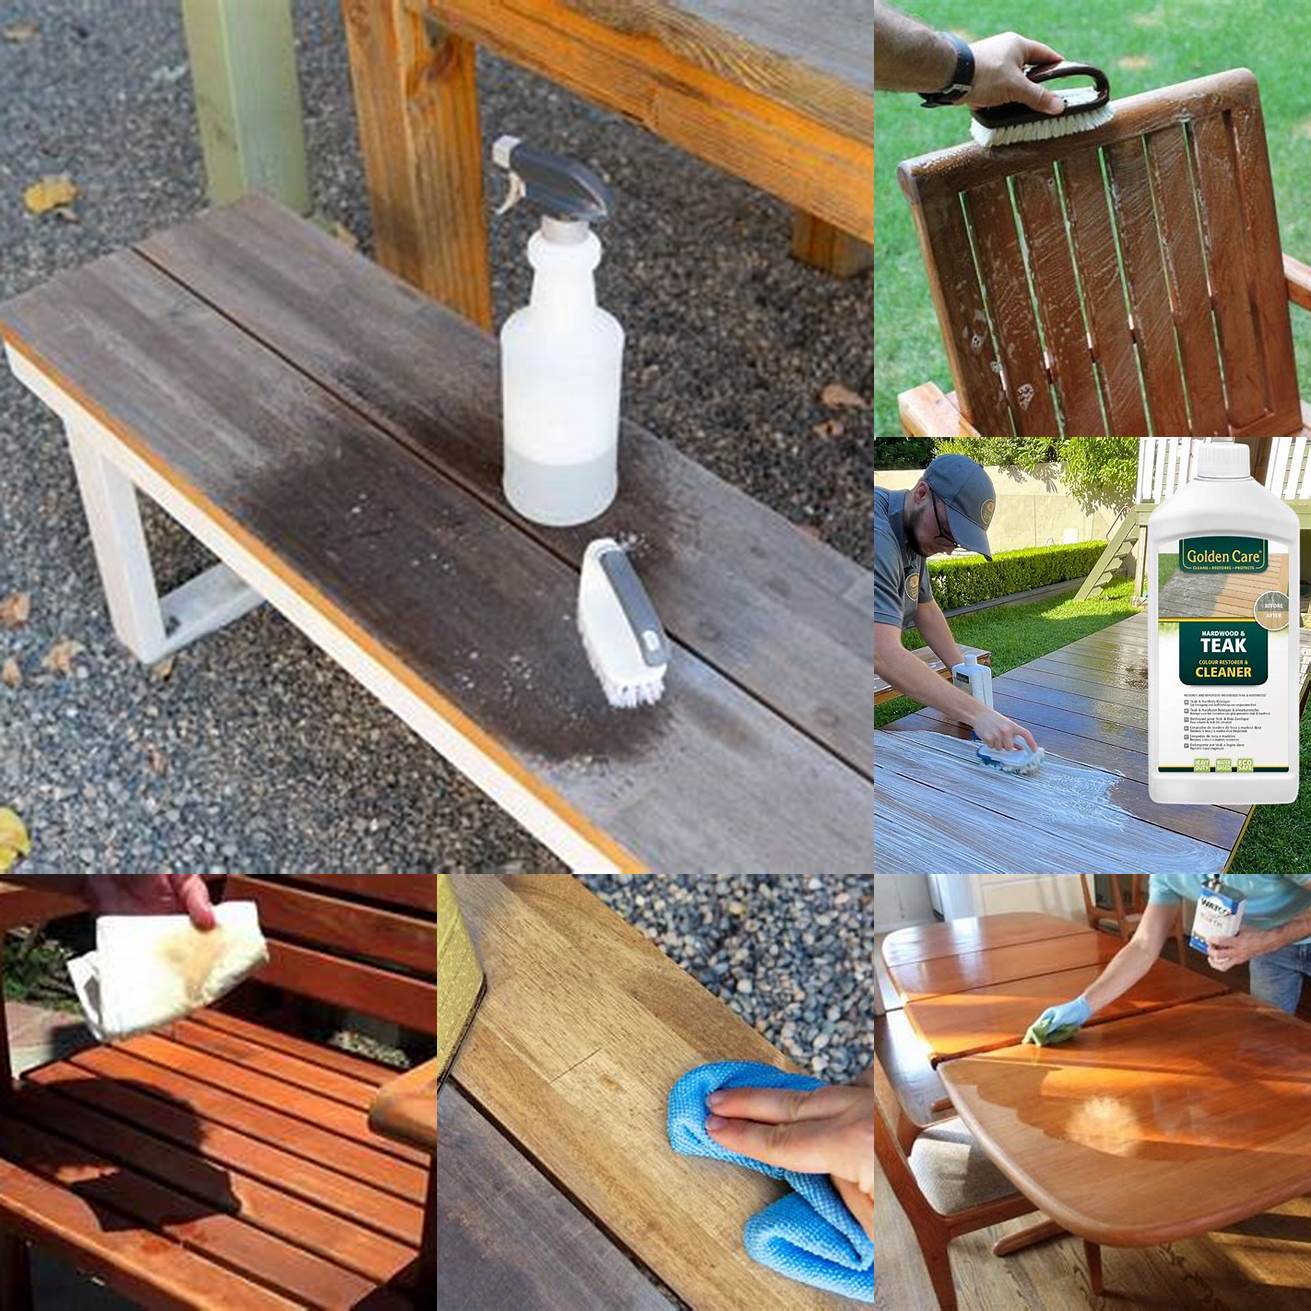 Avoid using harsh chemicals when cleaning teak furniture